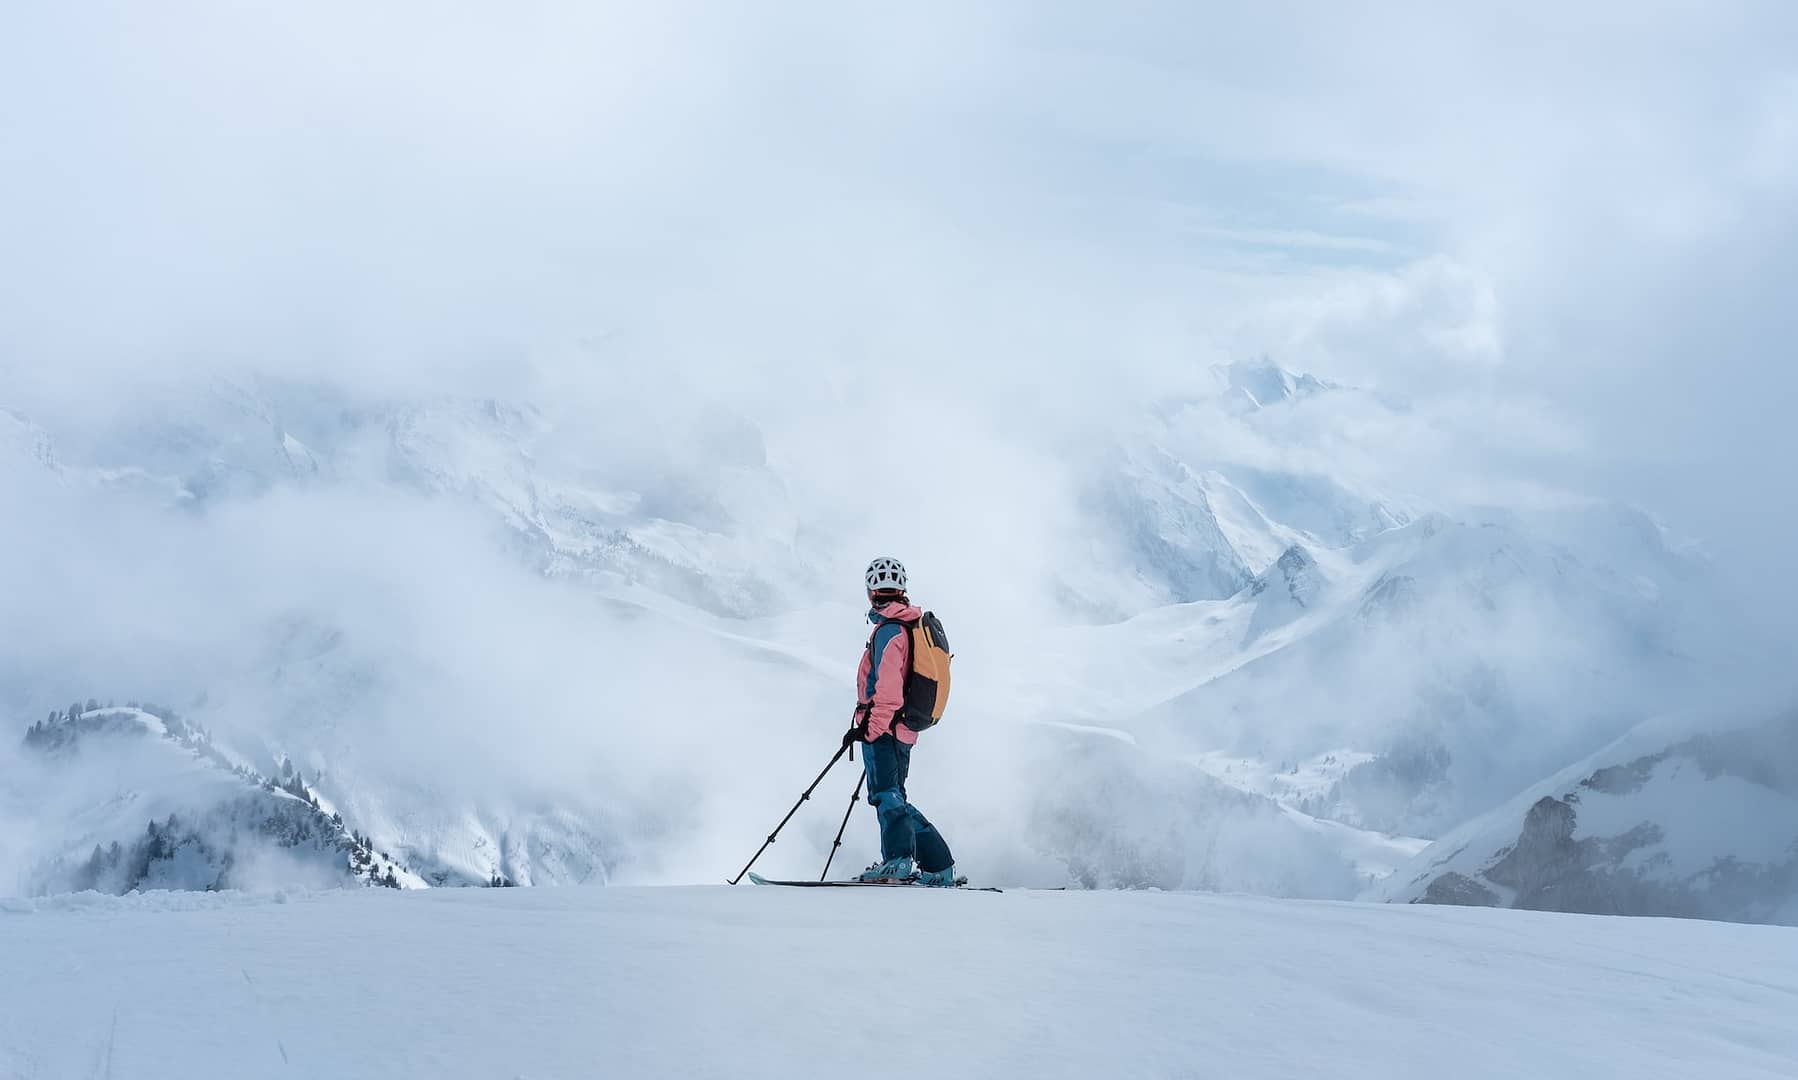 ski instructor - jobs you can do while earning and traveling the world